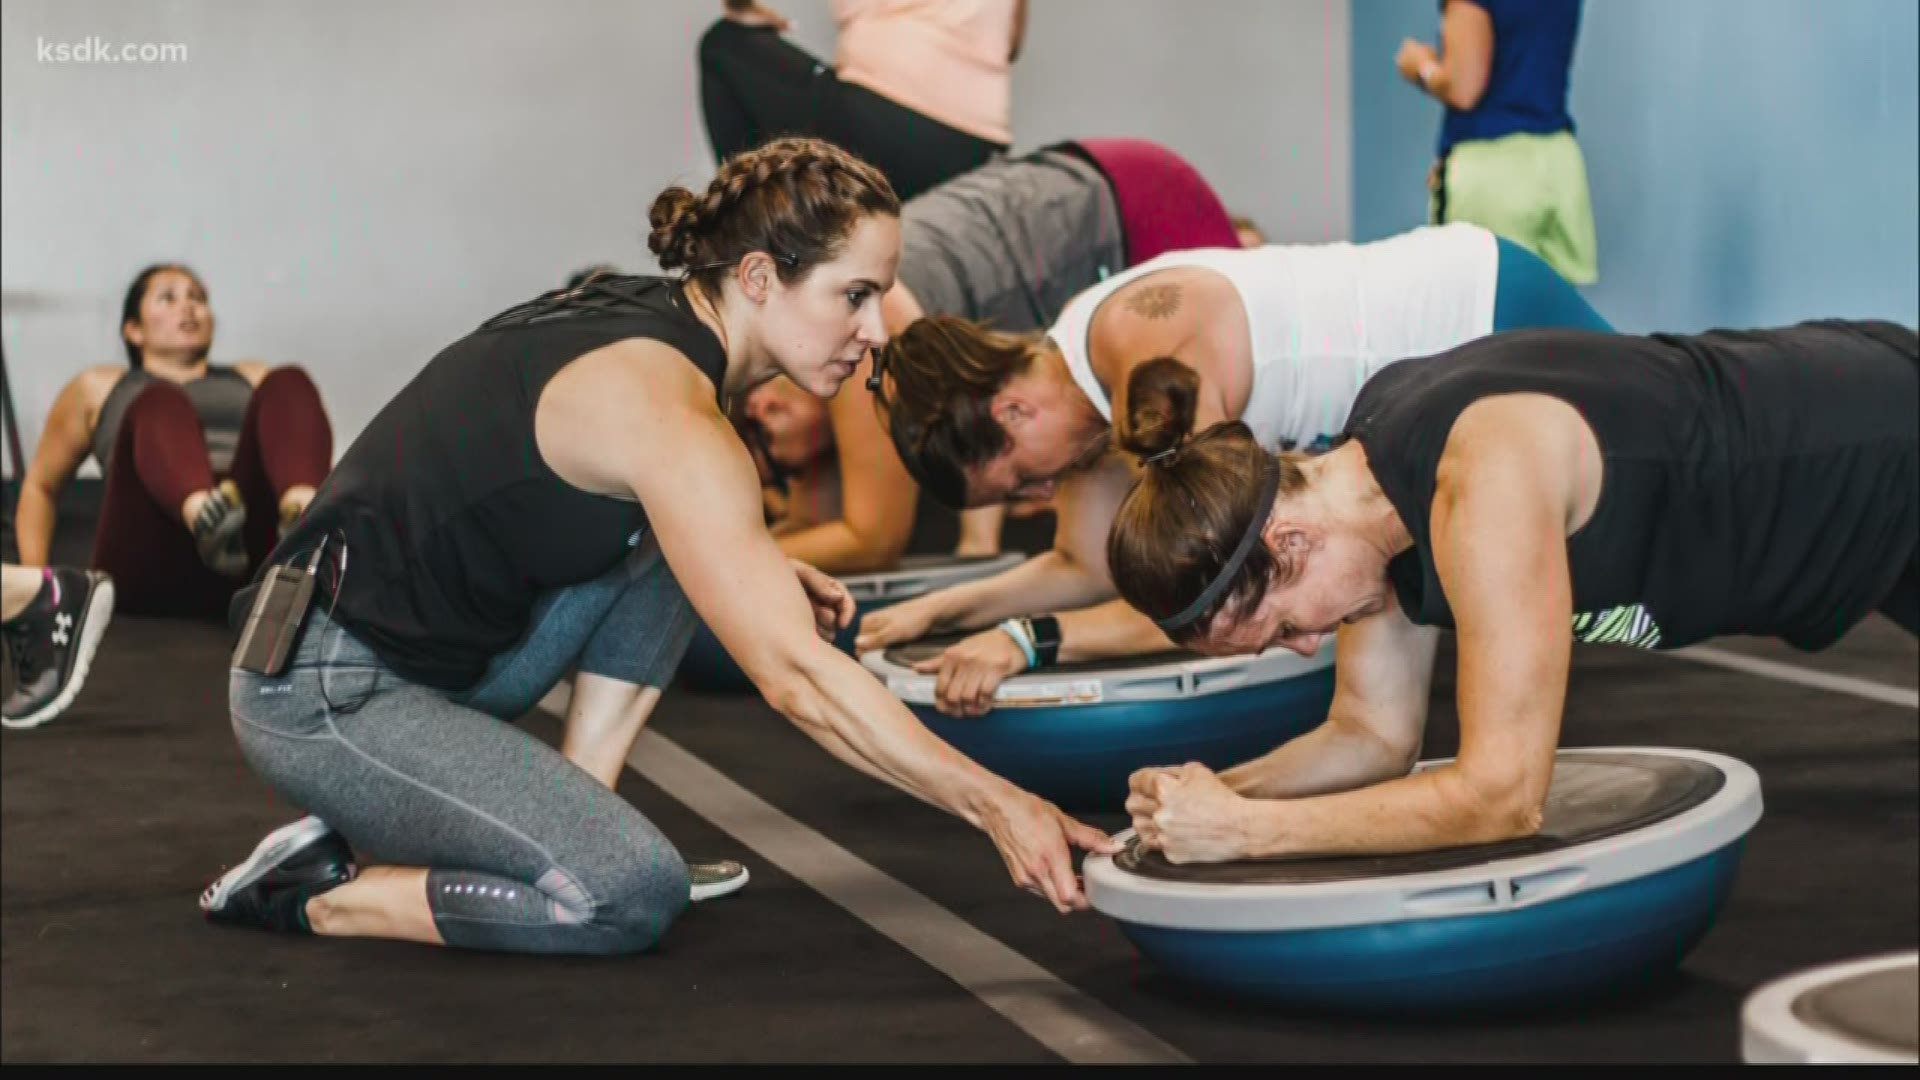 Mary attended Burn Boot Camp’s “Focus Meetings.” In addition to 45-minute classes, the fitness studio guides member through their health goals.